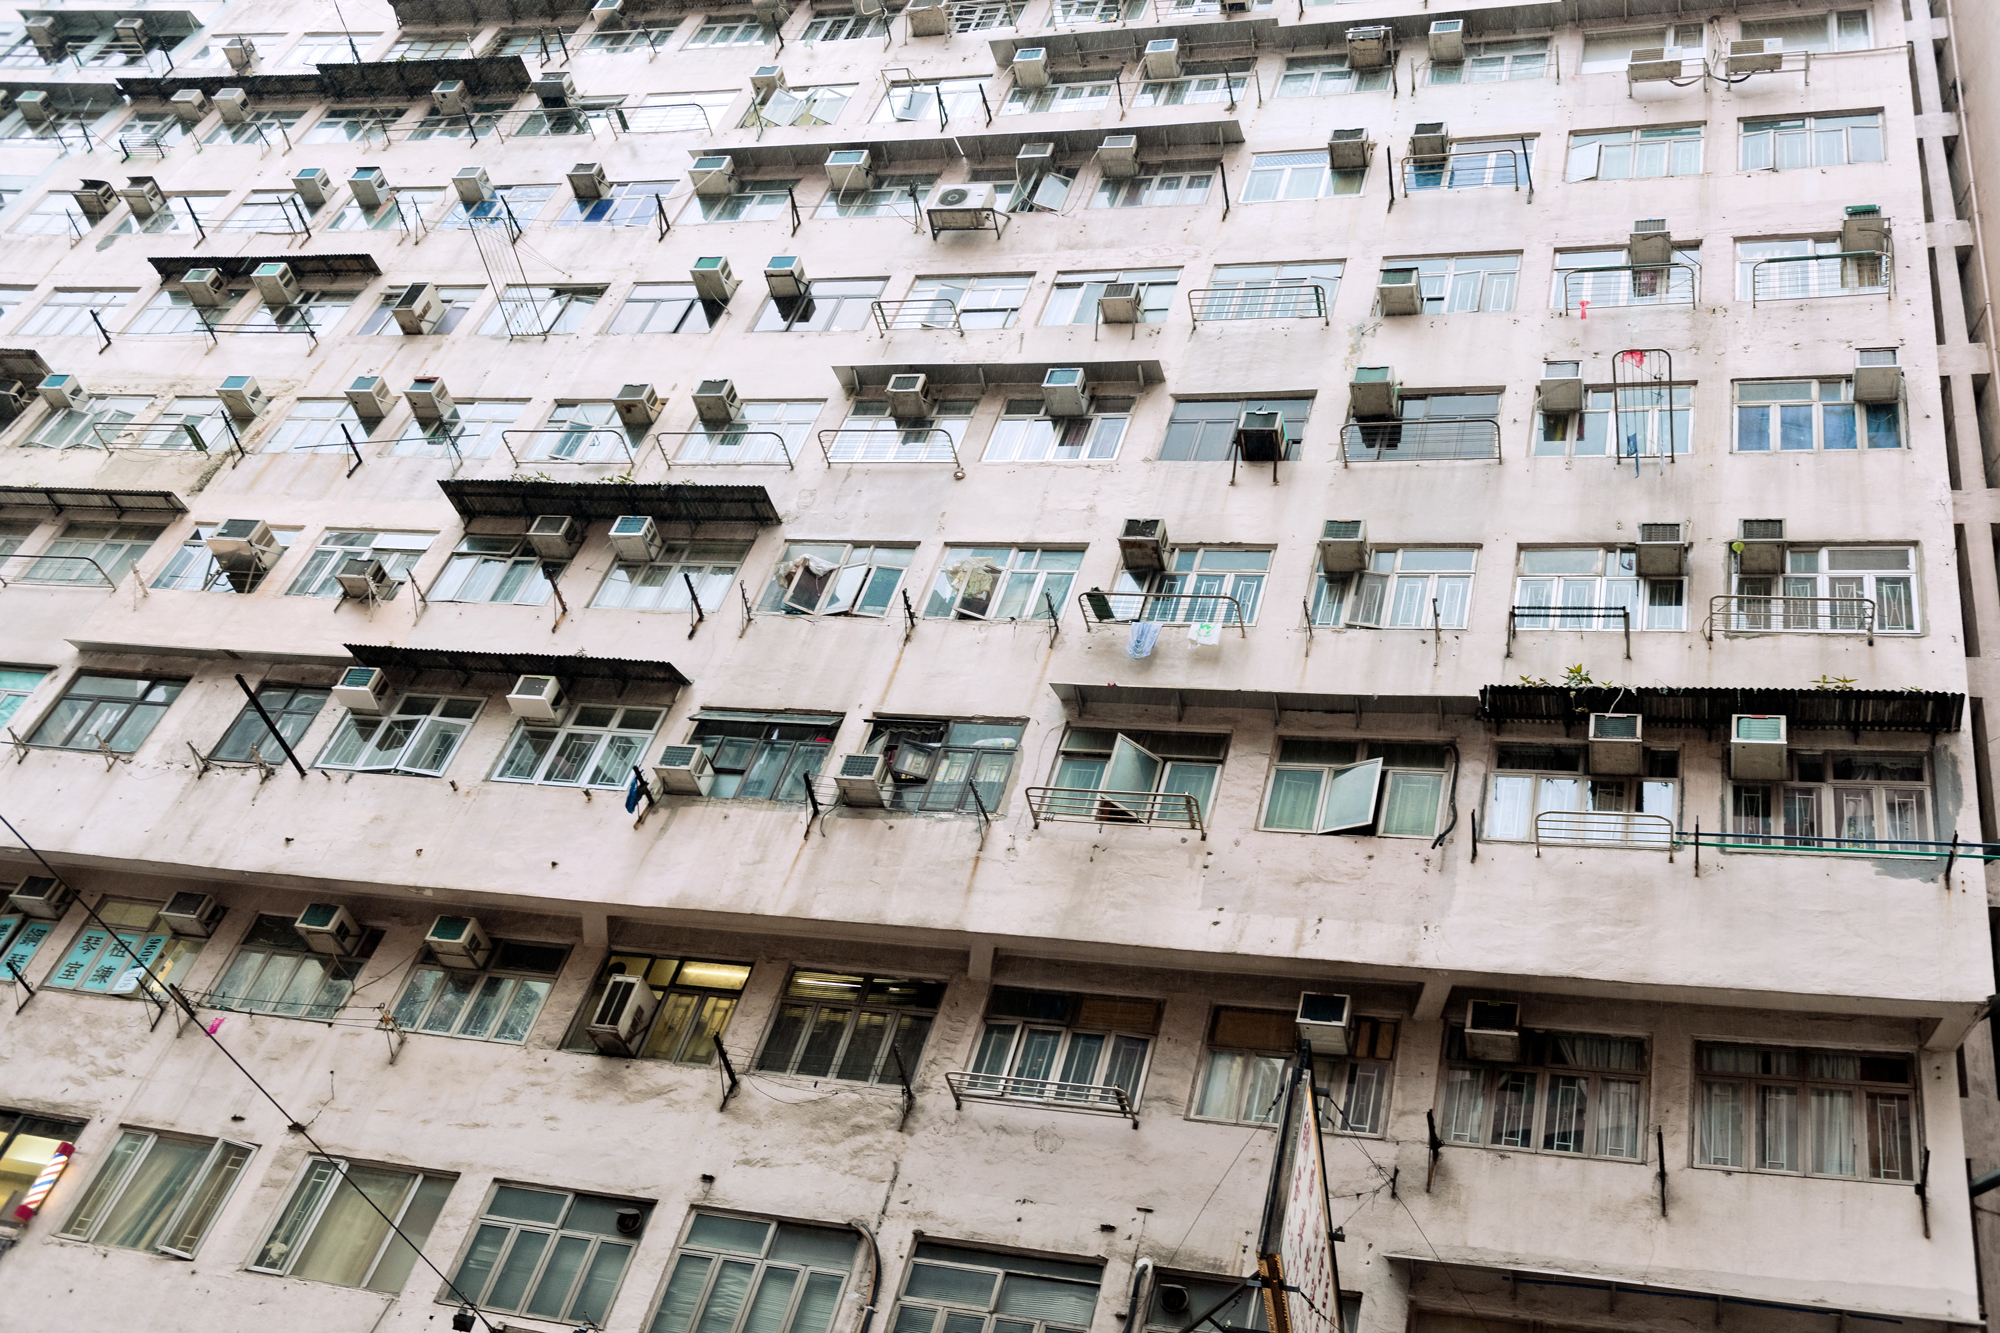 An apartment building littered with air conditioning units on every window.